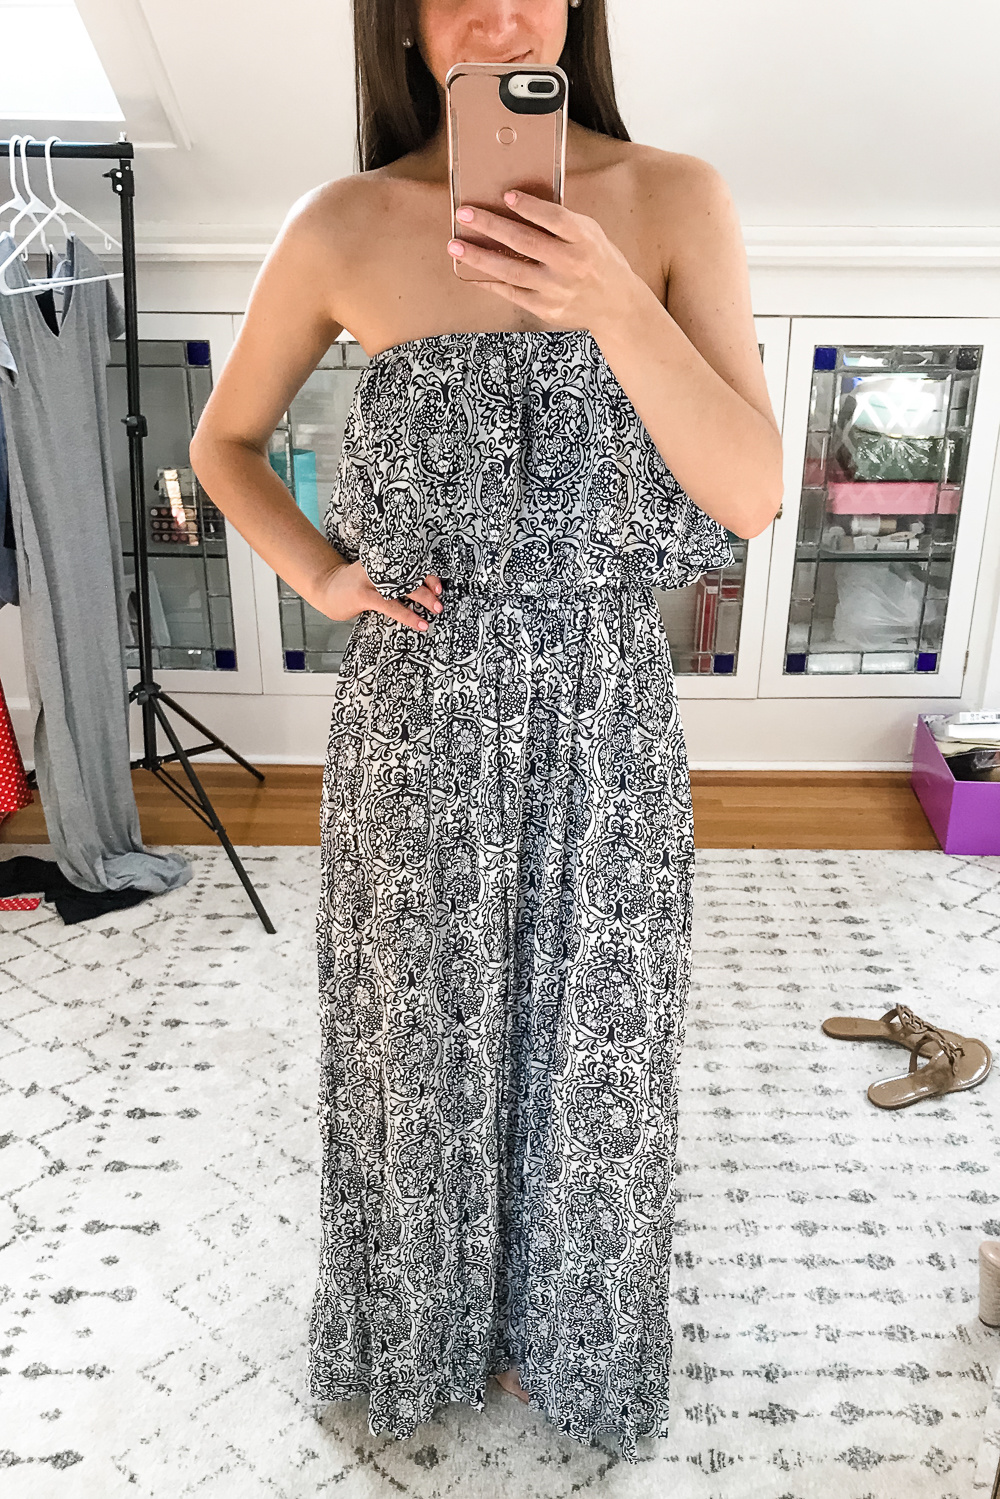 Blue and White Yidarton Boho Maxi Dress on Amazon, Amazon Summer Try-On Haul and Style Picks by popular affordable fashion blogger Stephanie Ziajka from Diary of a Debutante